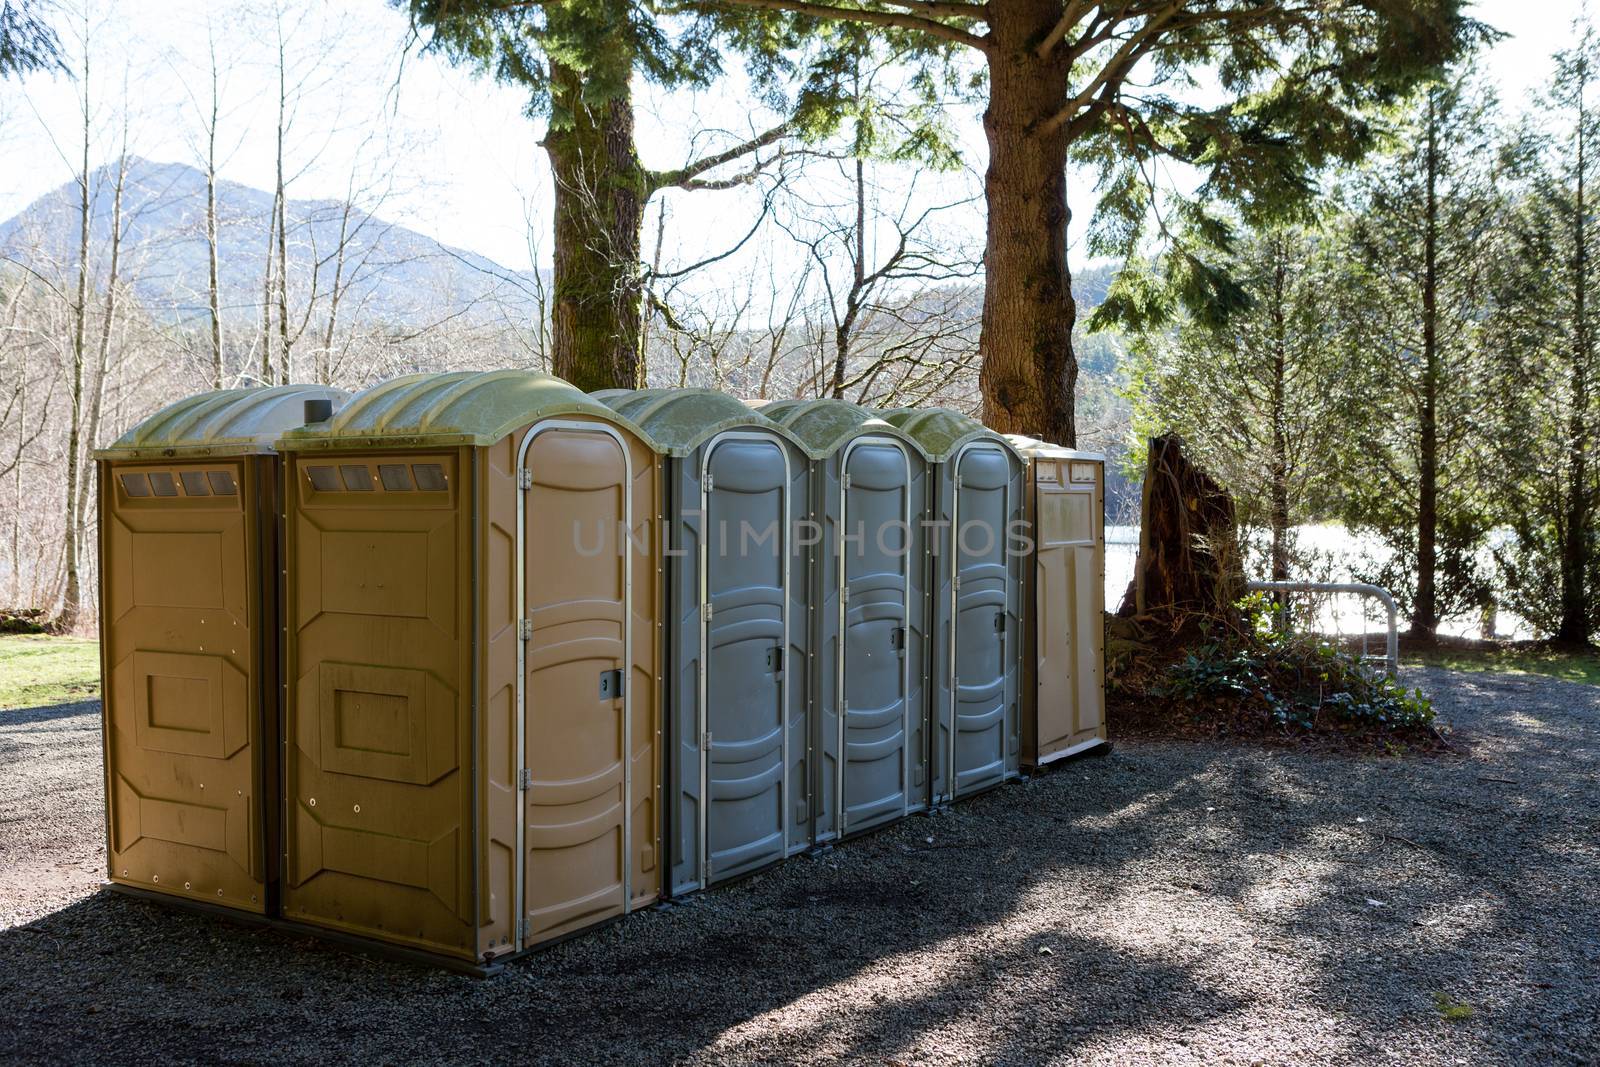 Row of public Portapotty toilets in a park by coskun